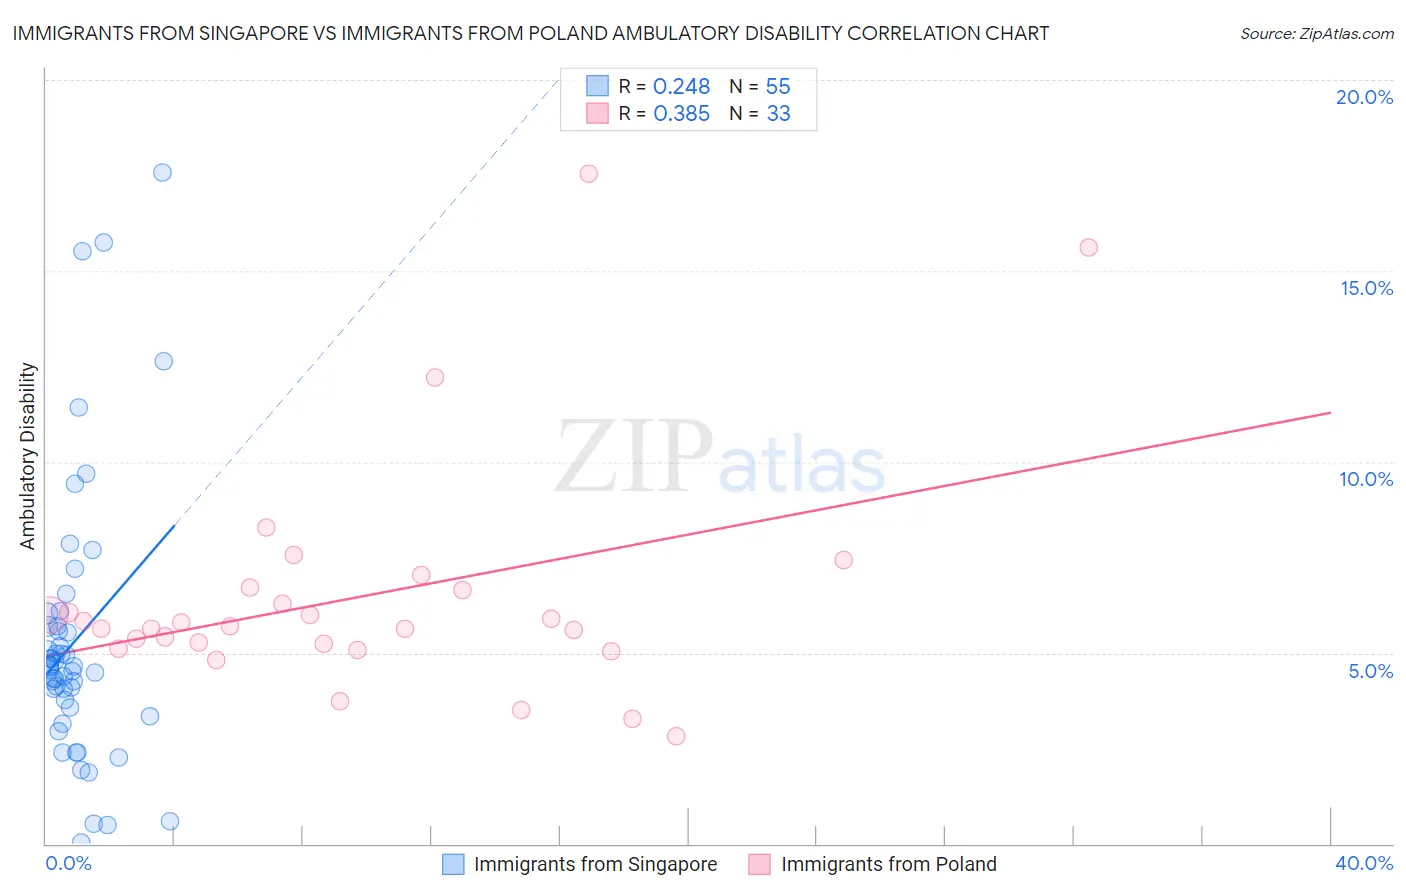 Immigrants from Singapore vs Immigrants from Poland Ambulatory Disability